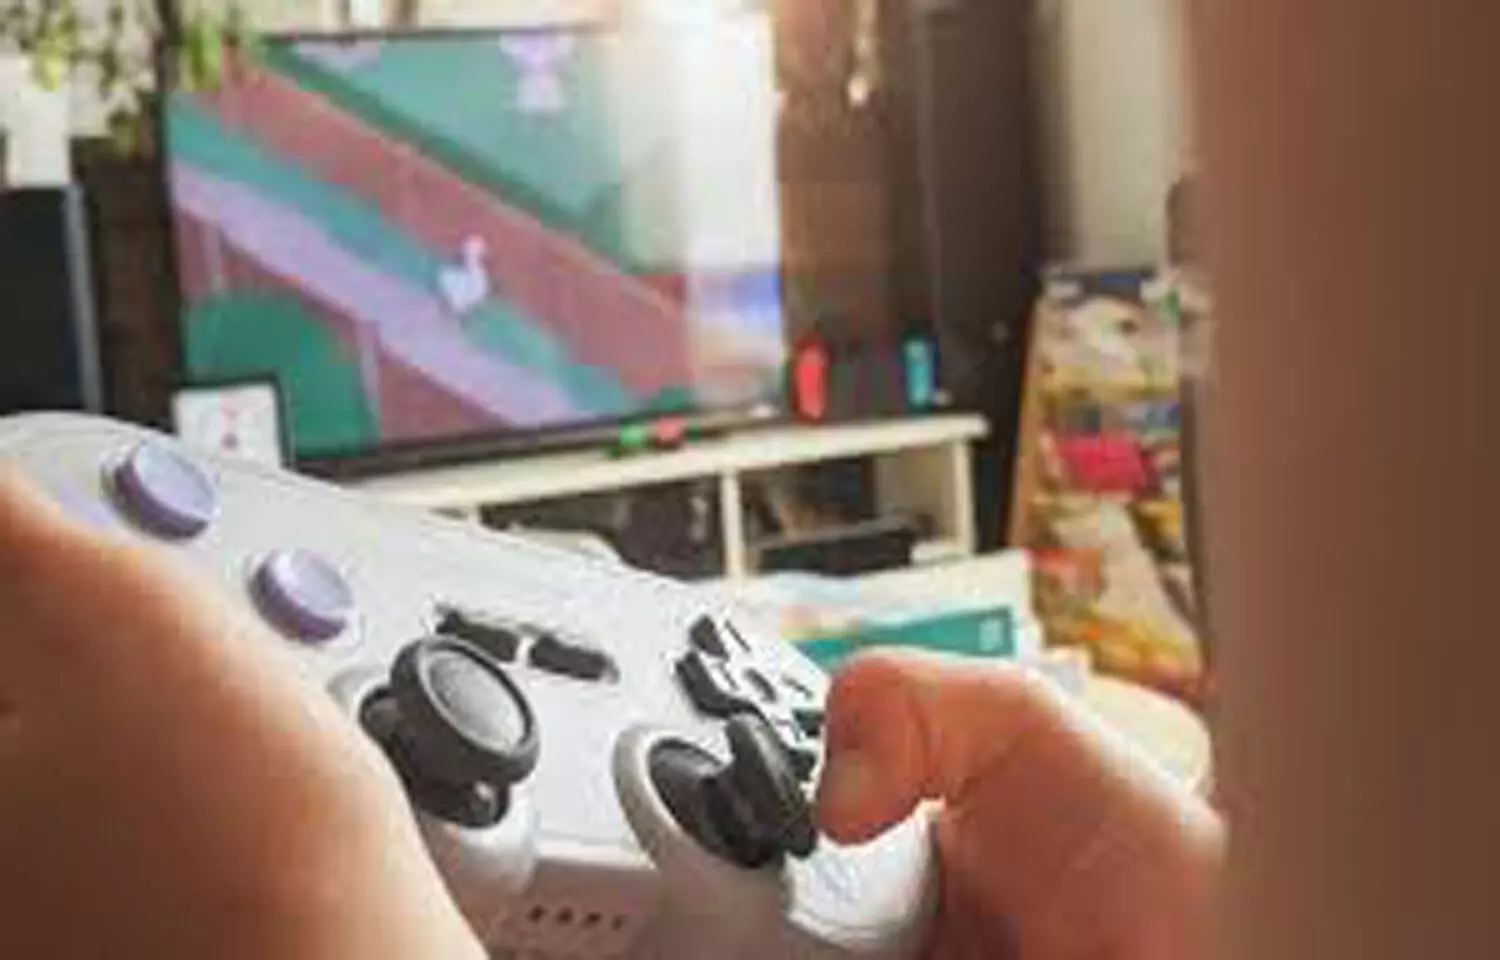 Playing video games during childhood can improve working memory later